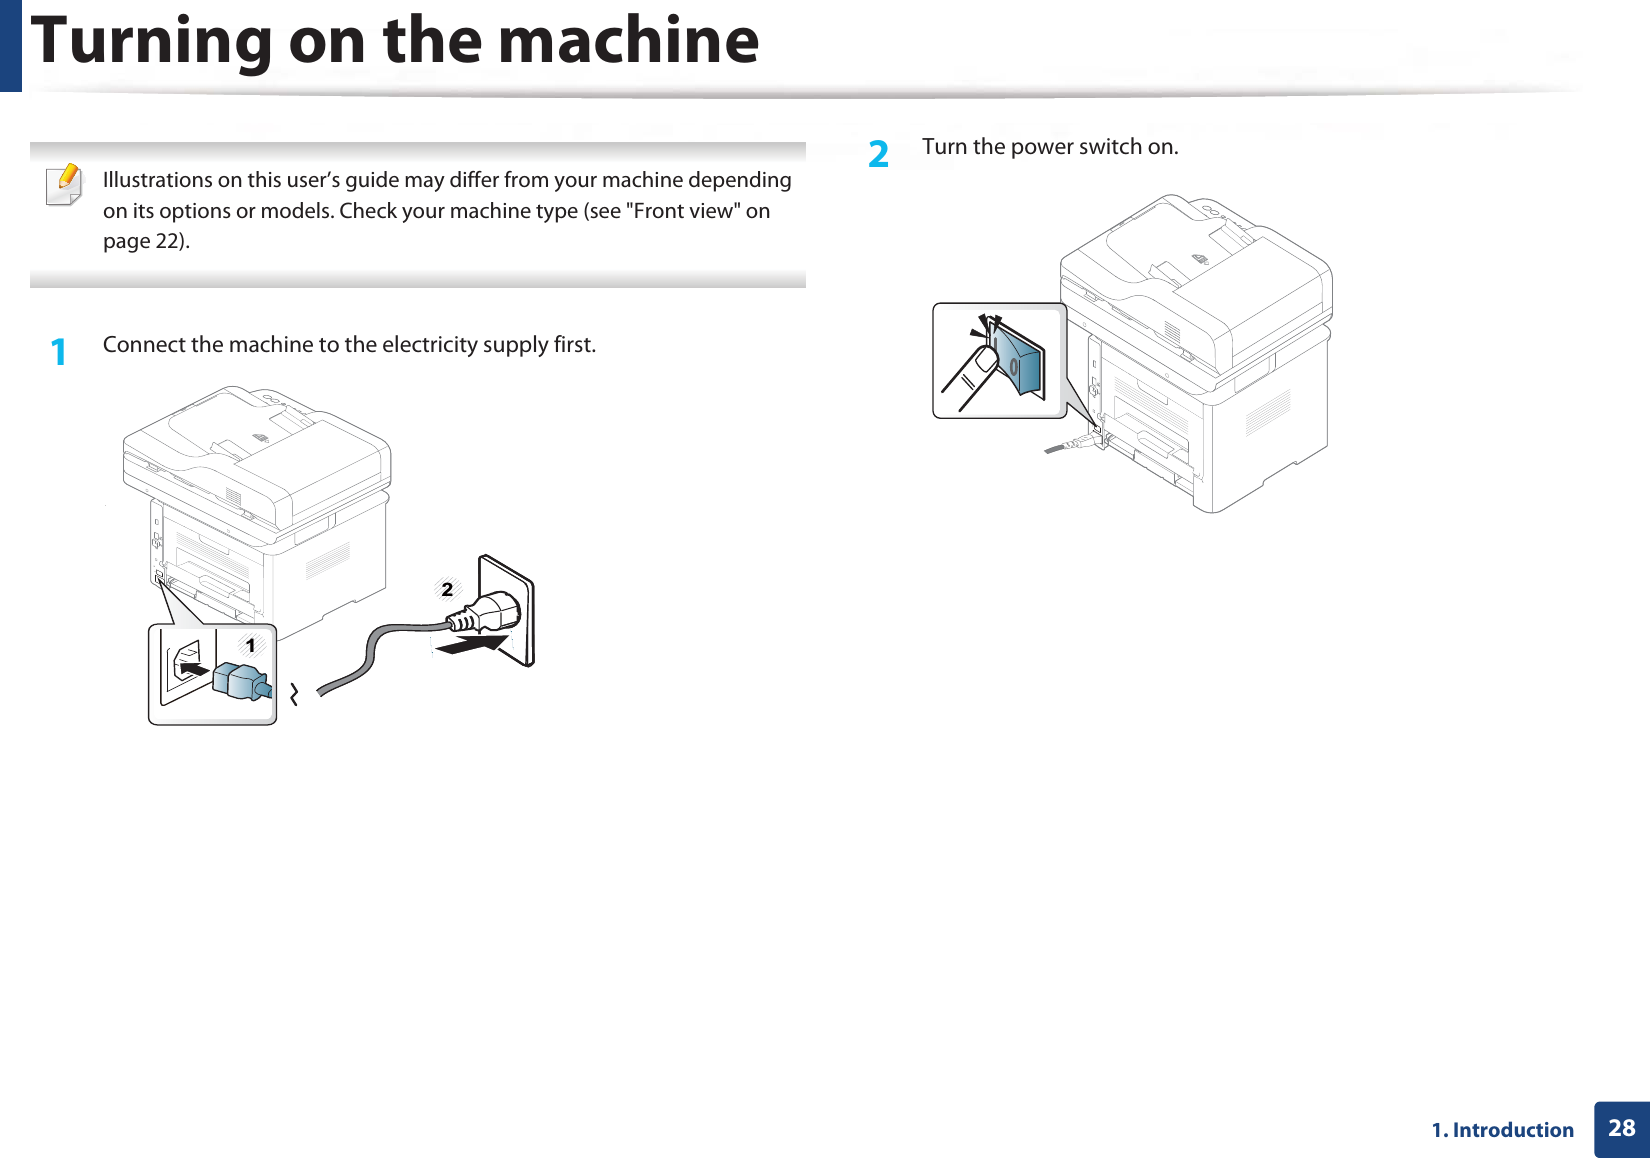 281. IntroductionTurning on the machine Illustrations on this user’s guide may differ from your machine depending on its options or models. Check your machine type (see &quot;Front view&quot; on page 22). 1Connect the machine to the electricity supply first.2  Turn the power switch on.12